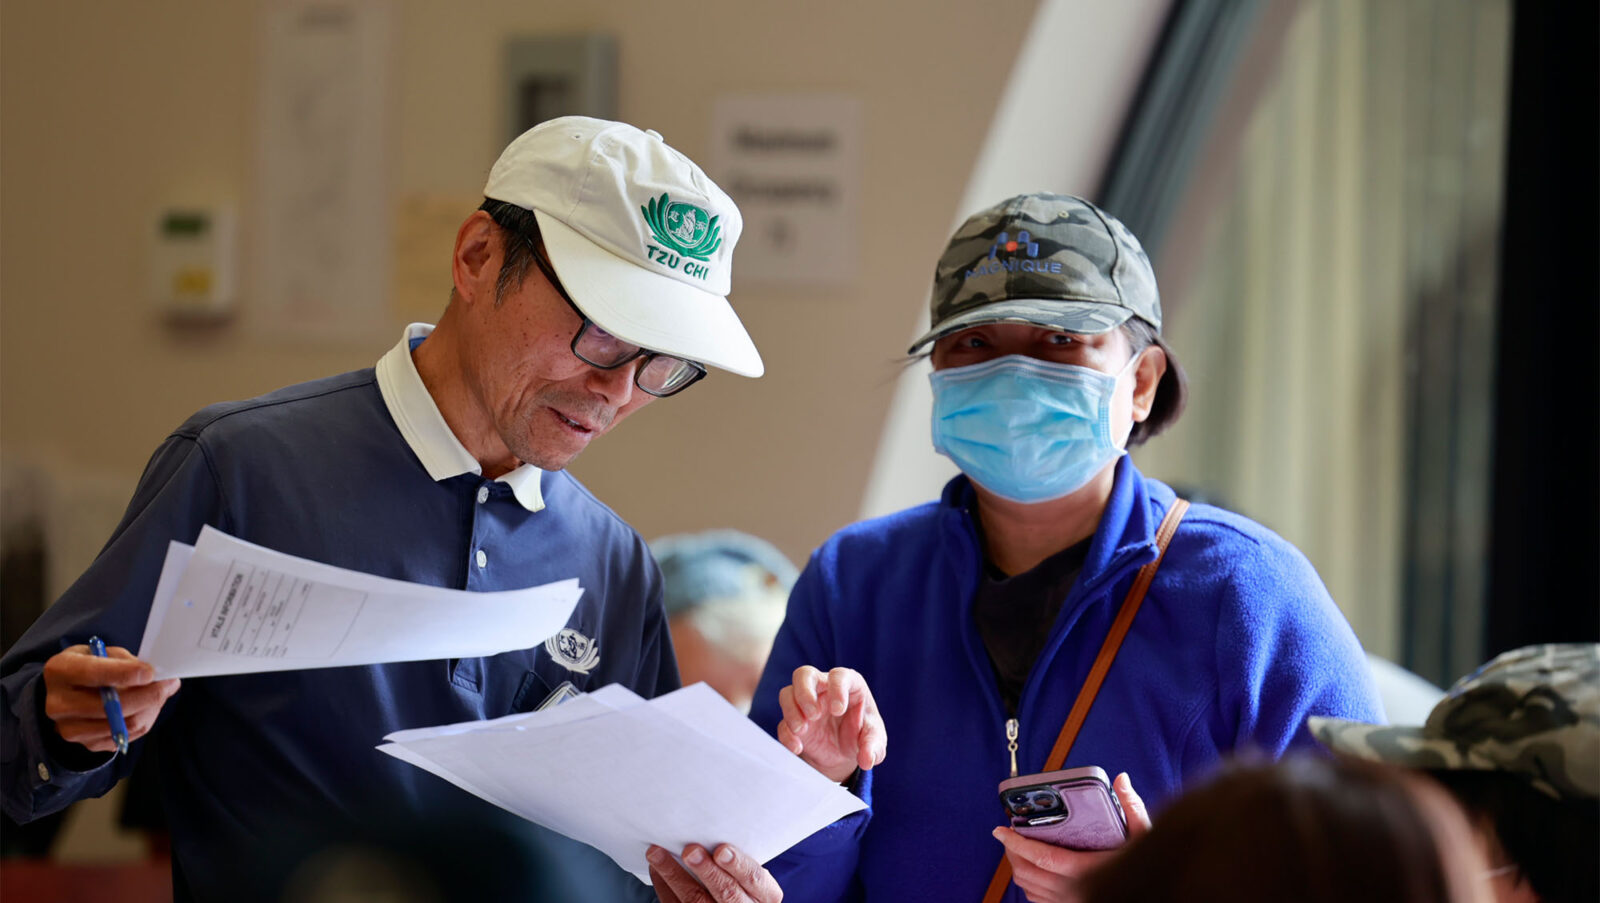 Chi-Jen Huang checking patient information